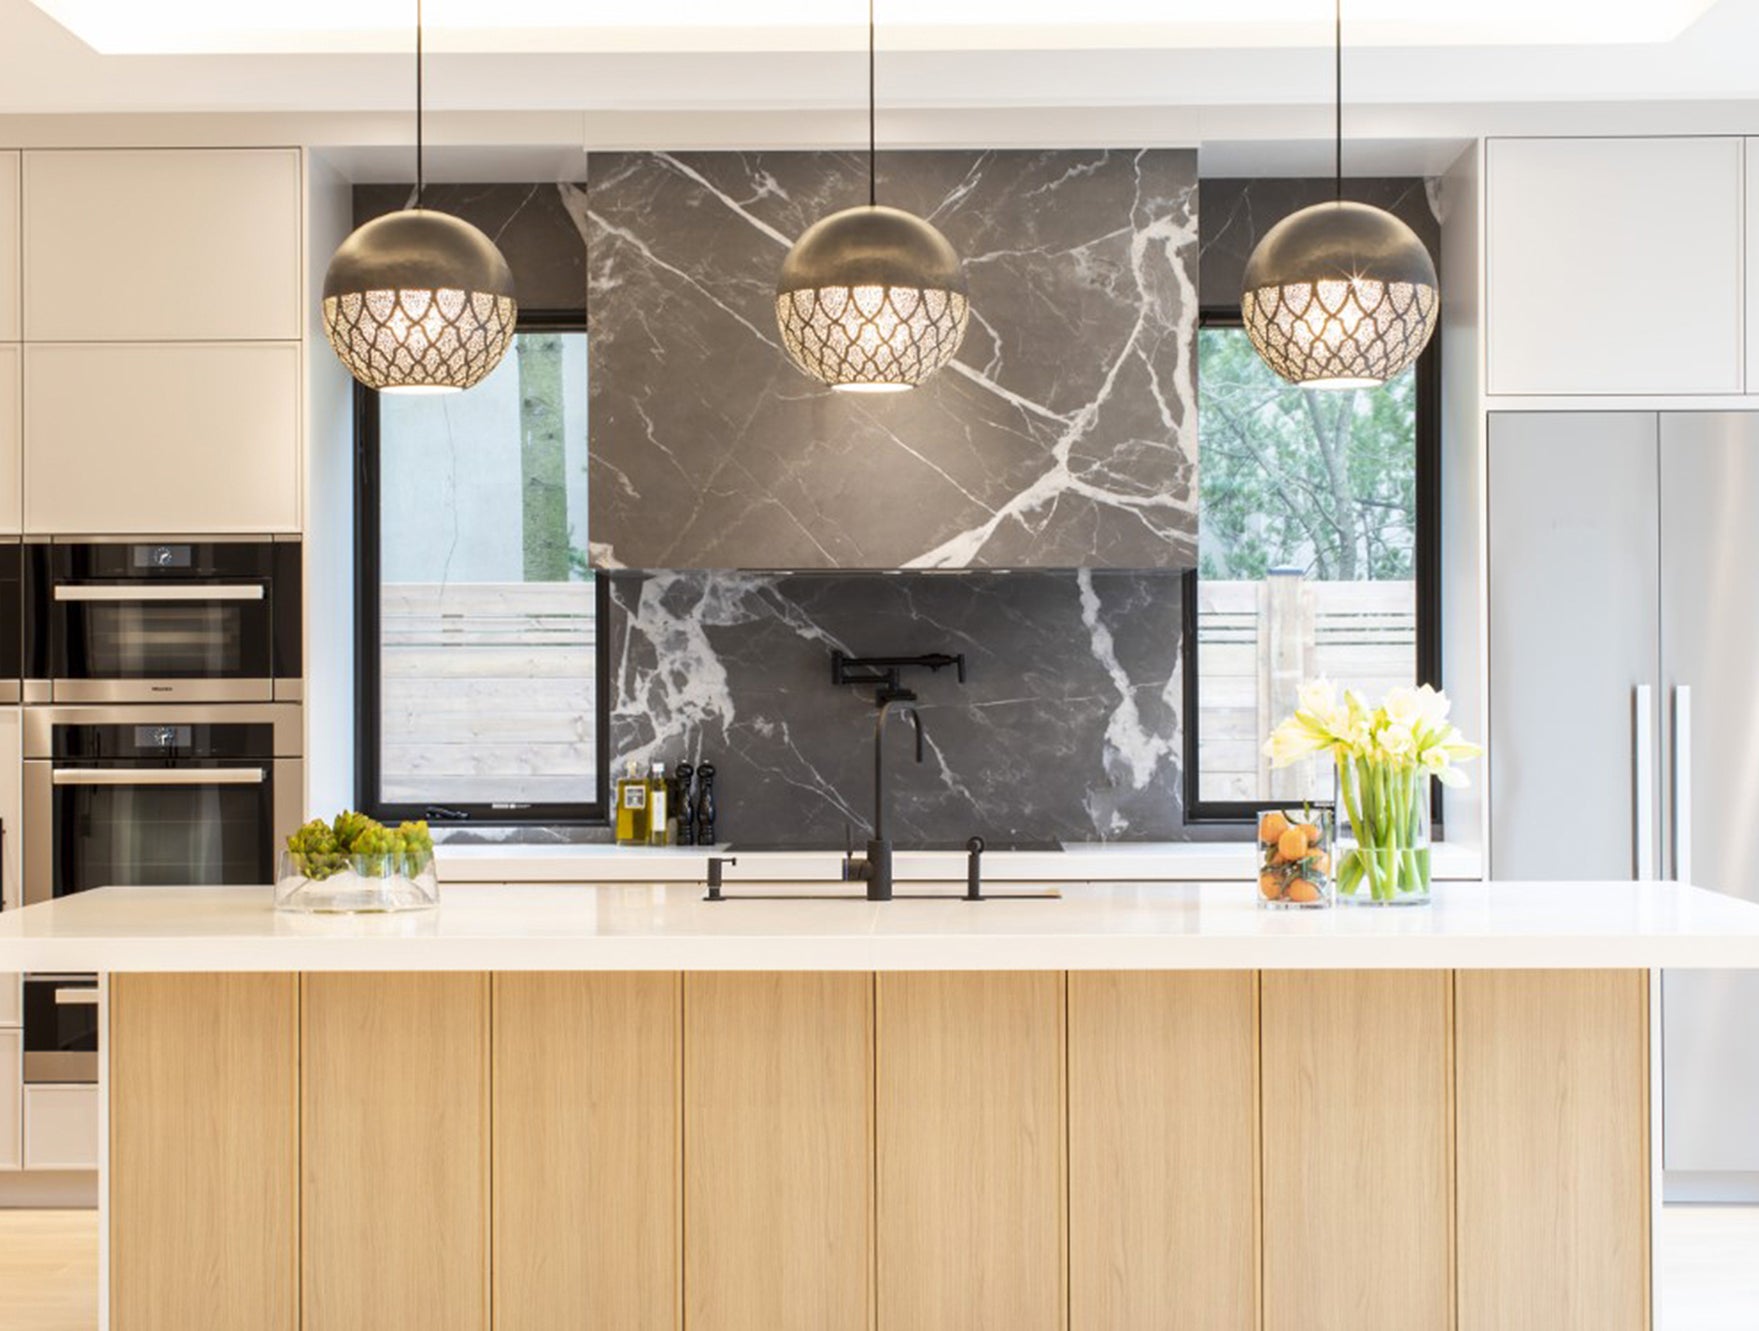 How to Hang Pendant Lights in a Kitchen